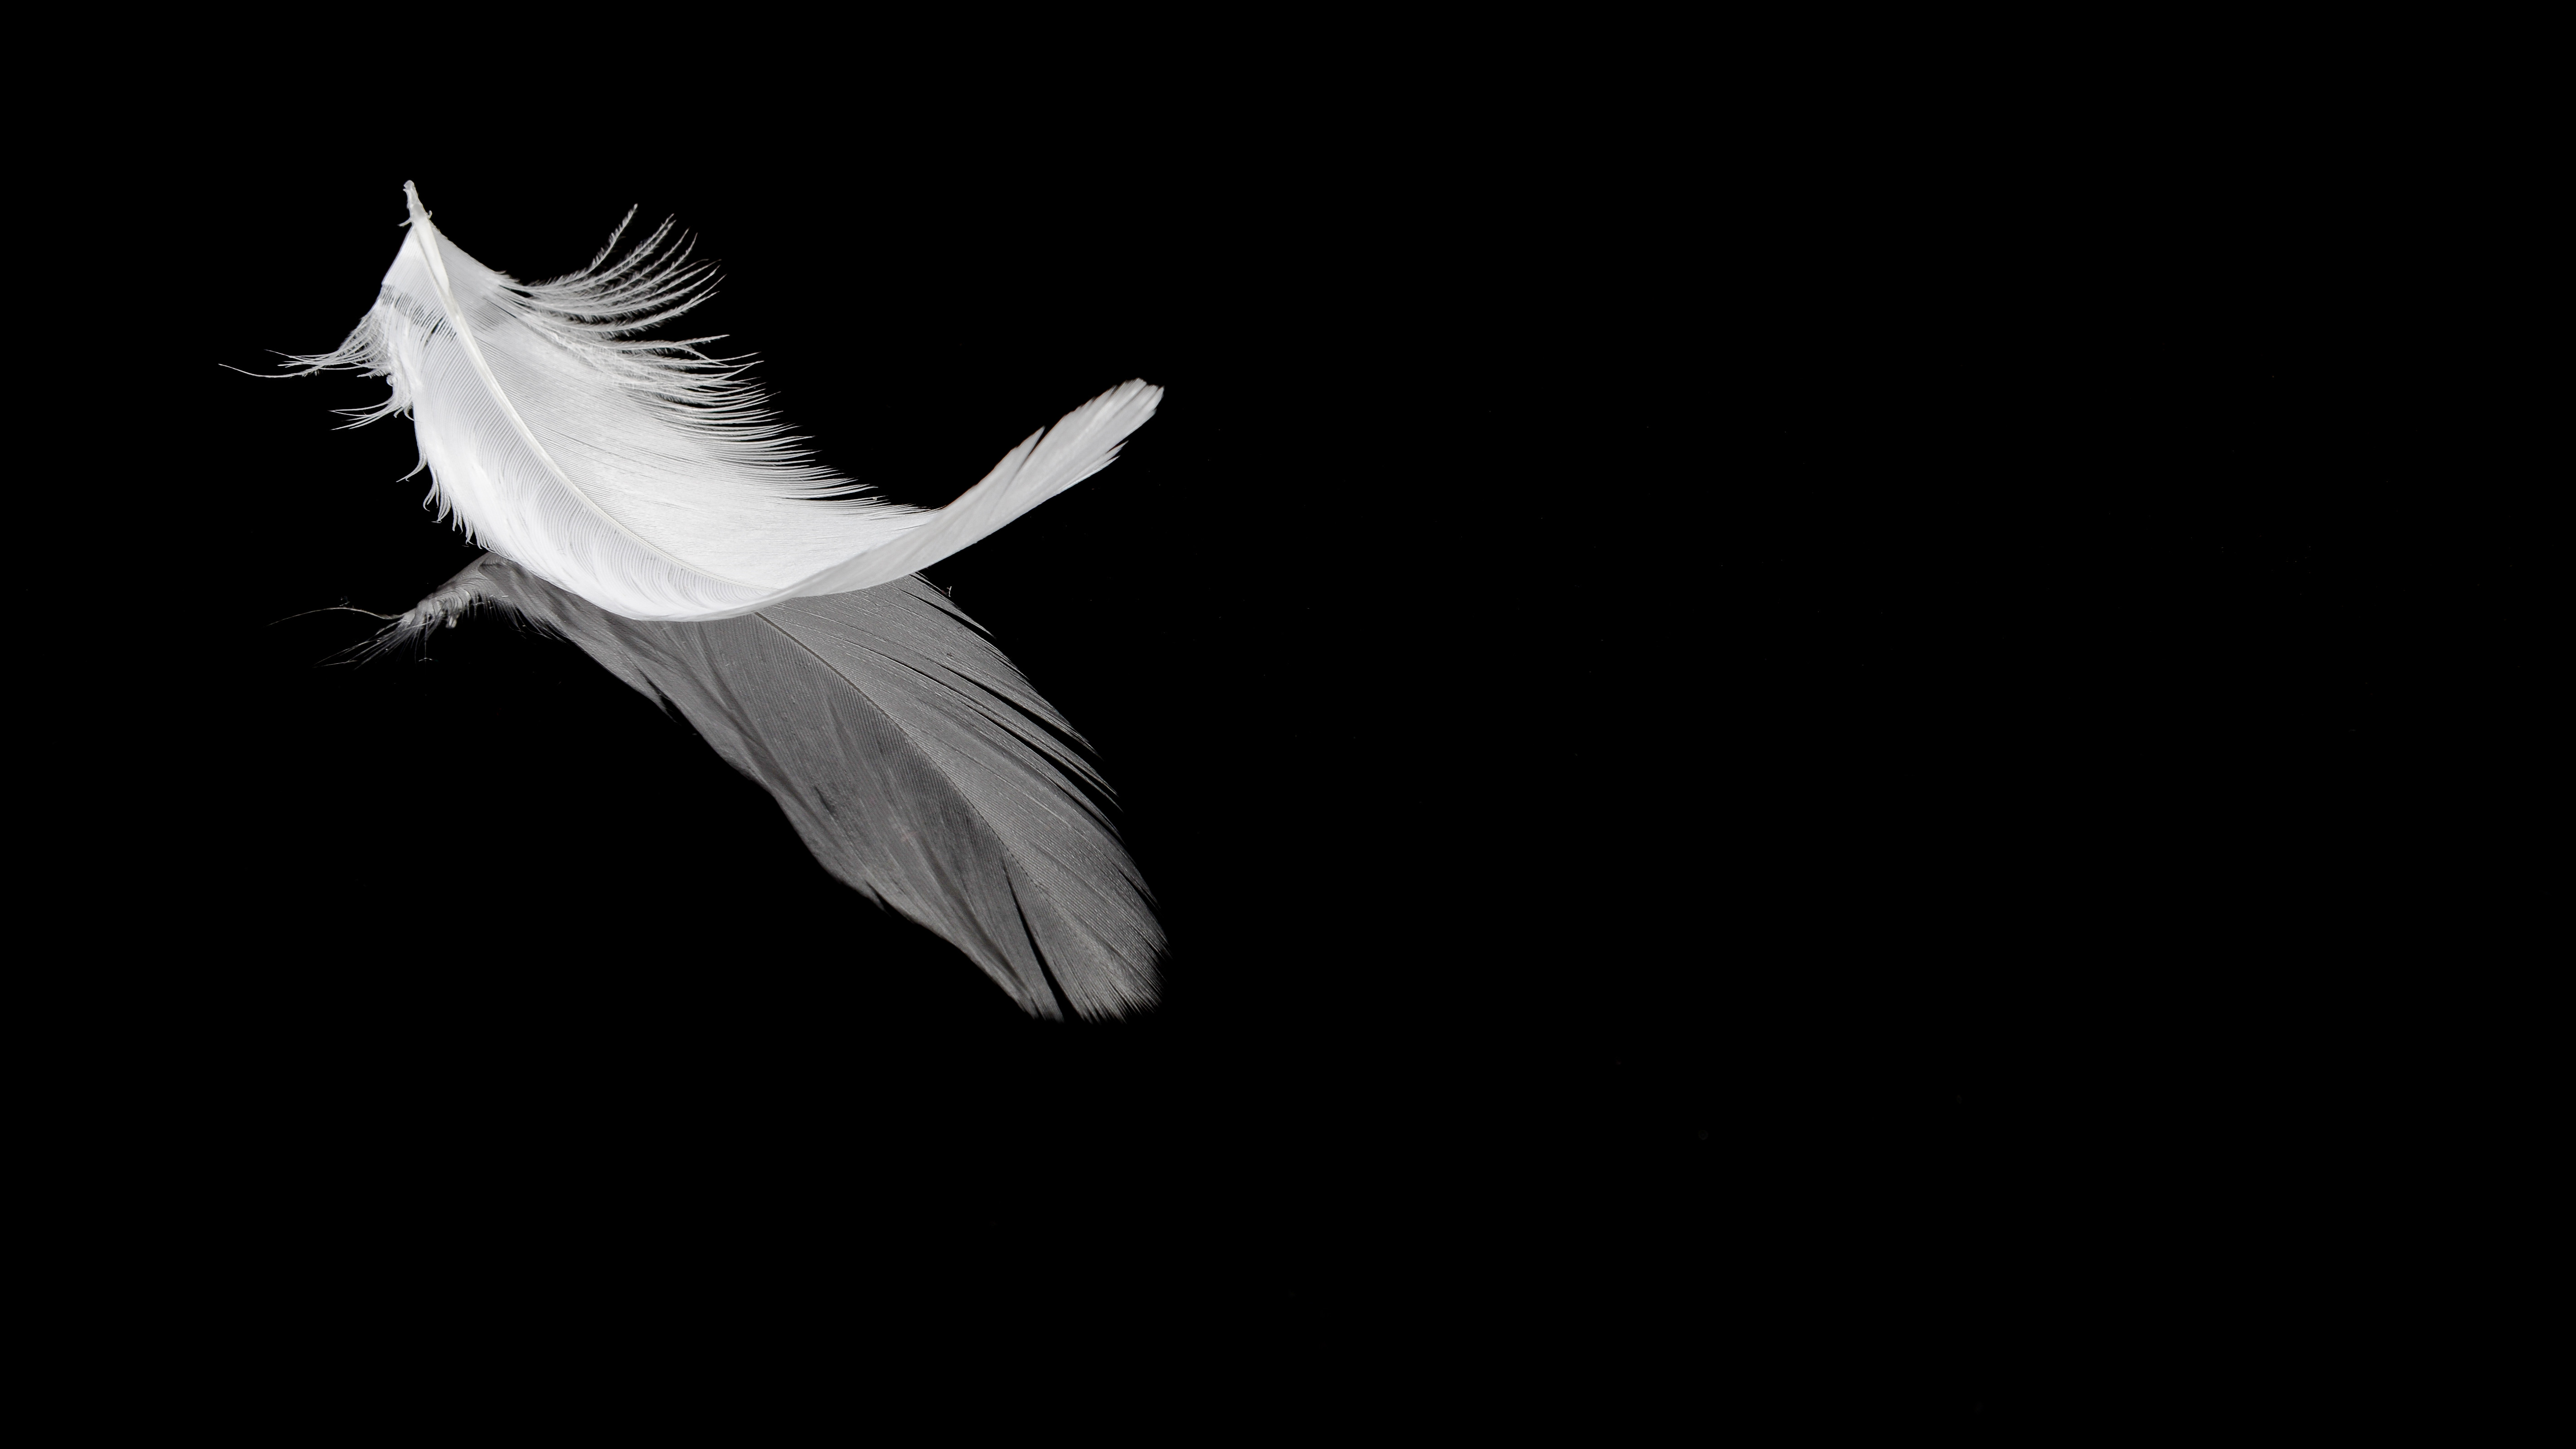 reflection, black, feather, bw, chb, pen High Definition image